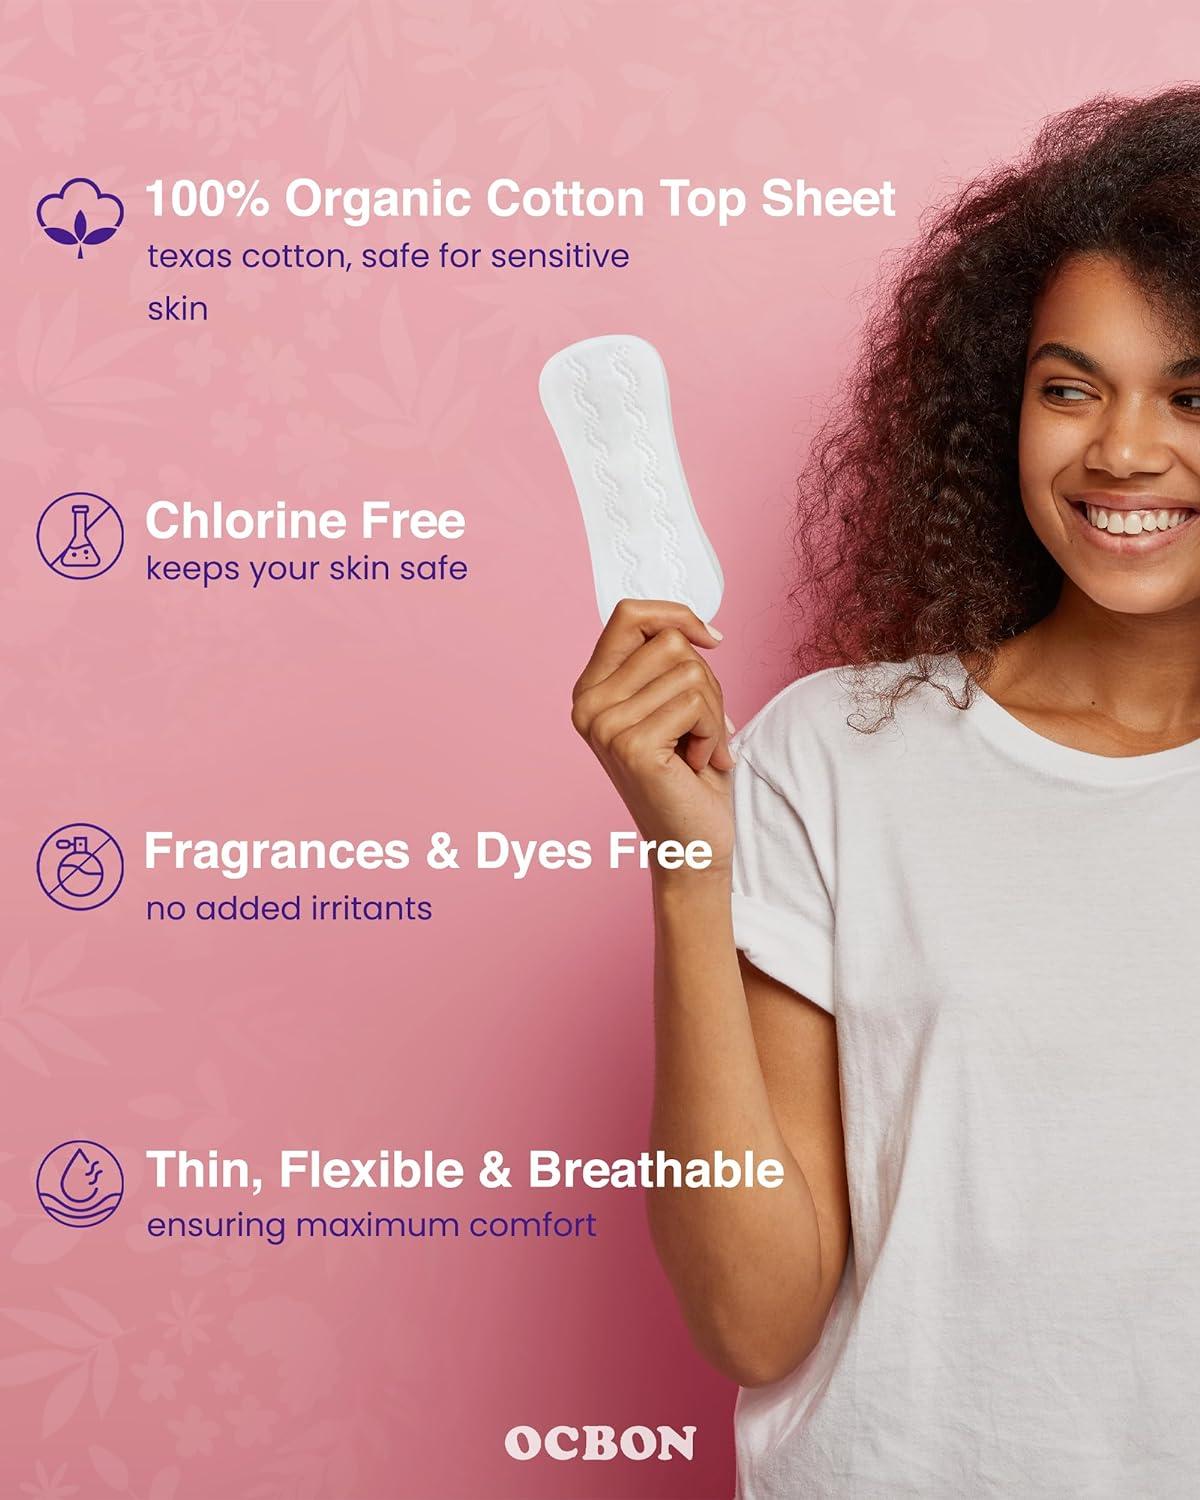 OCBON Pantyliner Regular - Ultra Thin 100% Organic Cotton Panty Liners -  Unscented Extra Soft Chemical-Free Organic Cotton Pads (40pcs Pack of 1)